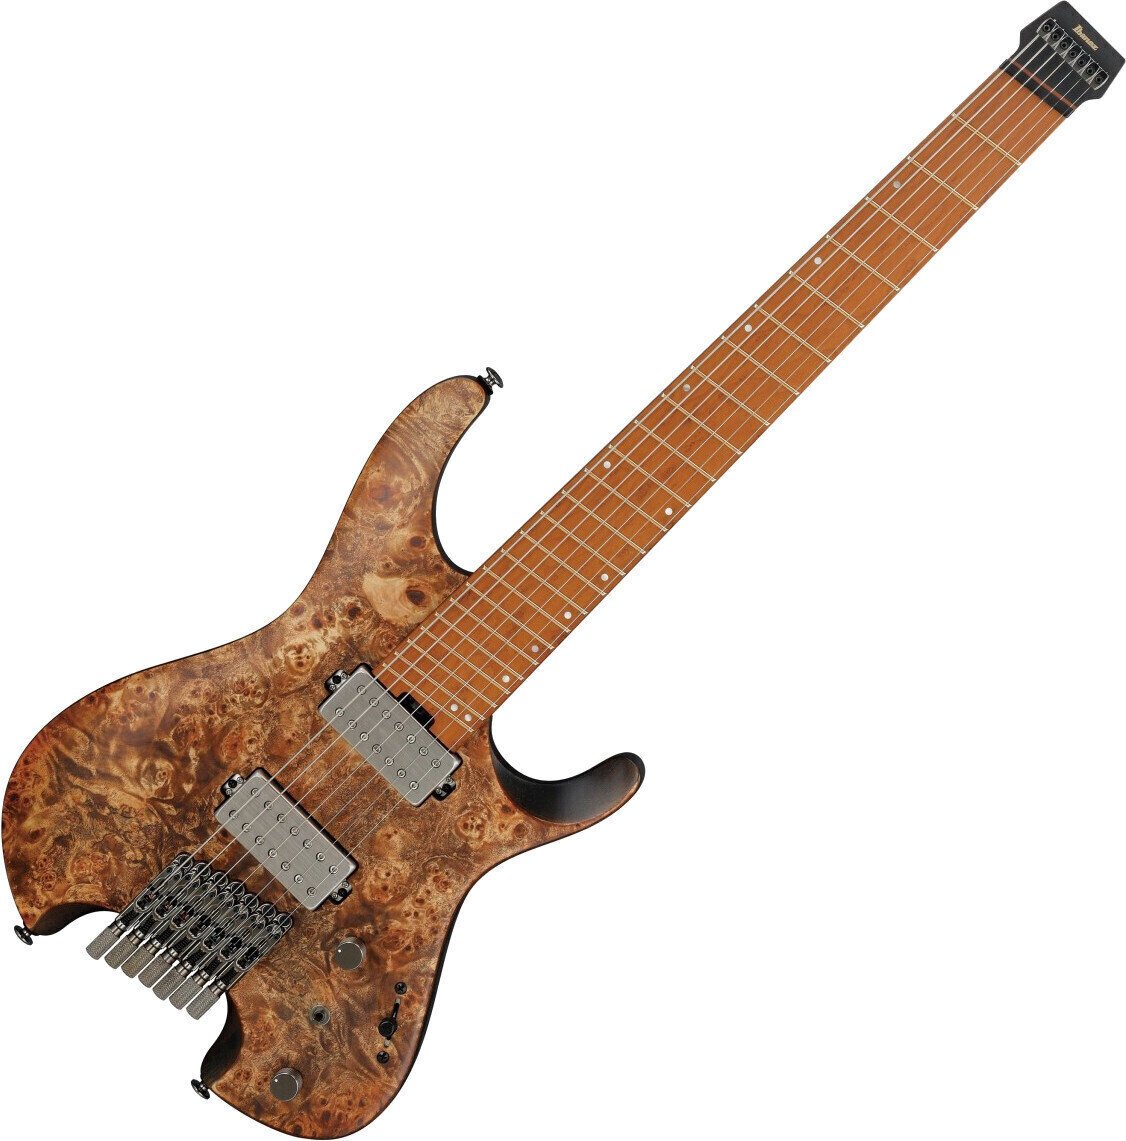 Guitarras sin pala Ibanez QX527PB-ABS Antique Brown Stained